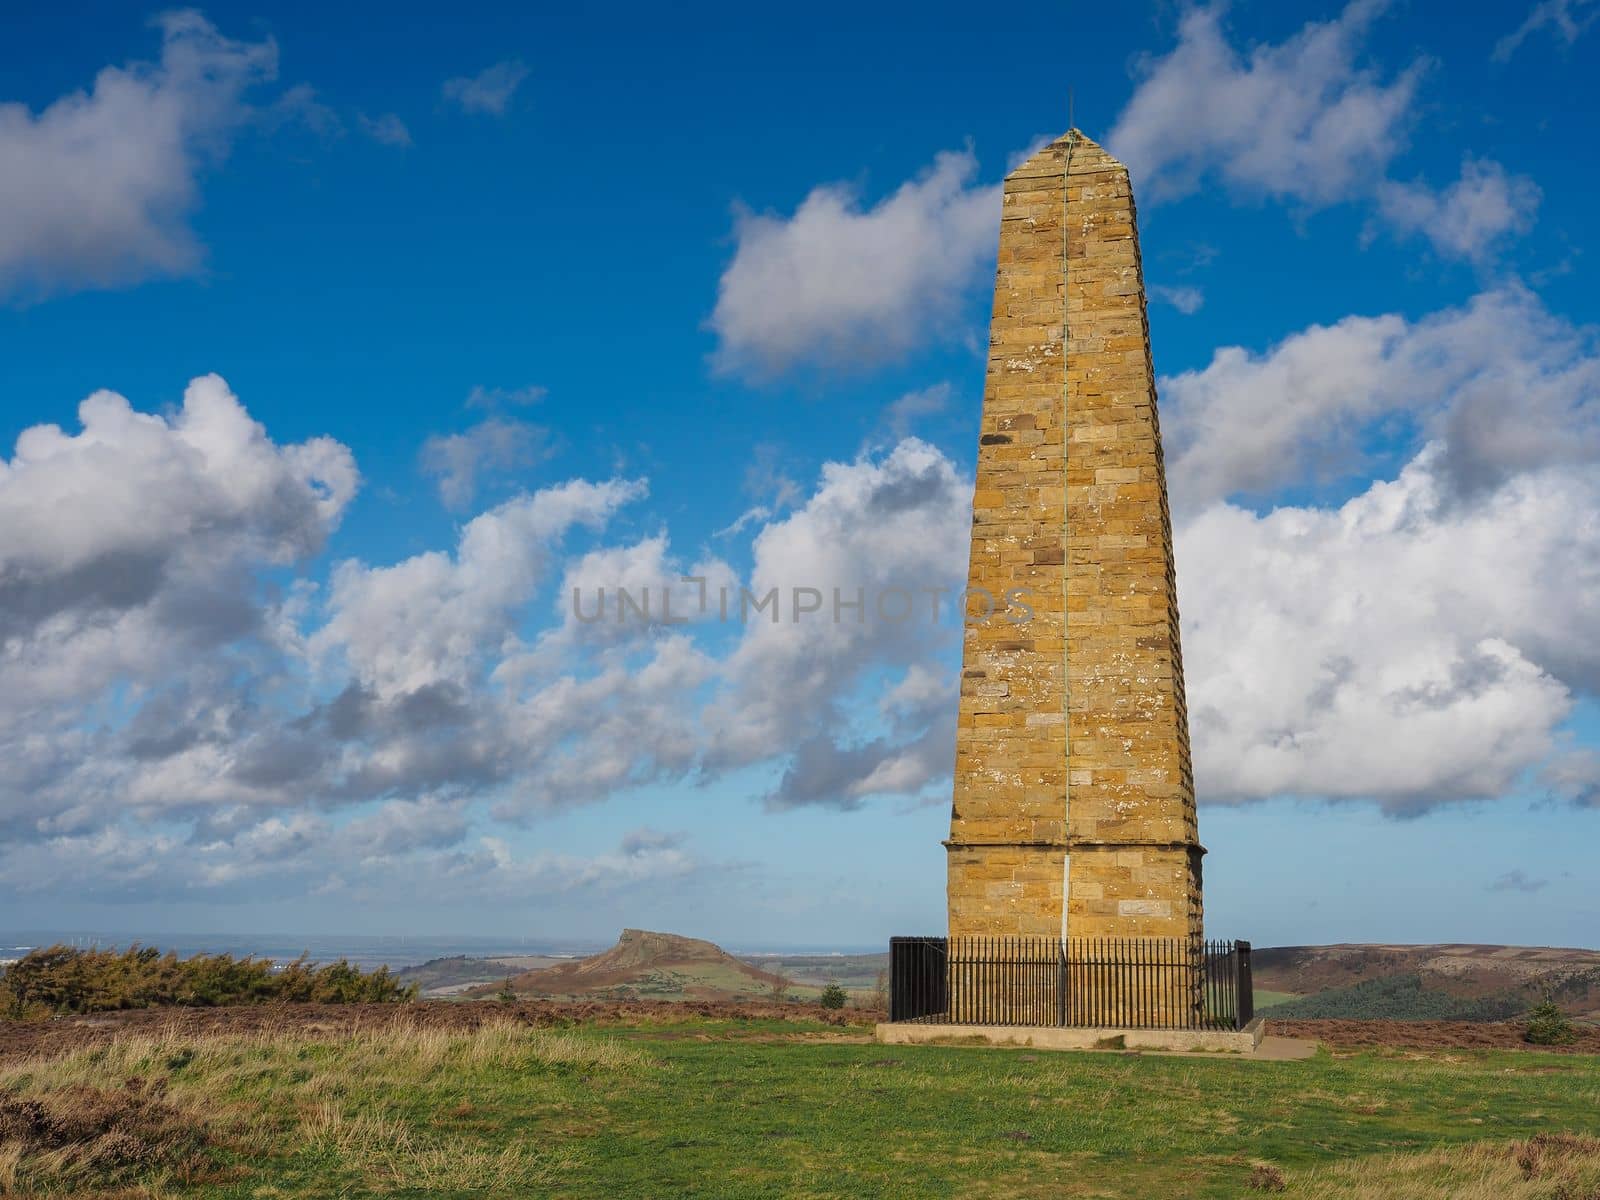 Captain Cooks Monument, erected in memory of the famous circumnavigator who lived in Great Ayton, overlooking Roseberry Topping, Yorkshires Matterhorn, North York Moors National Park, UK